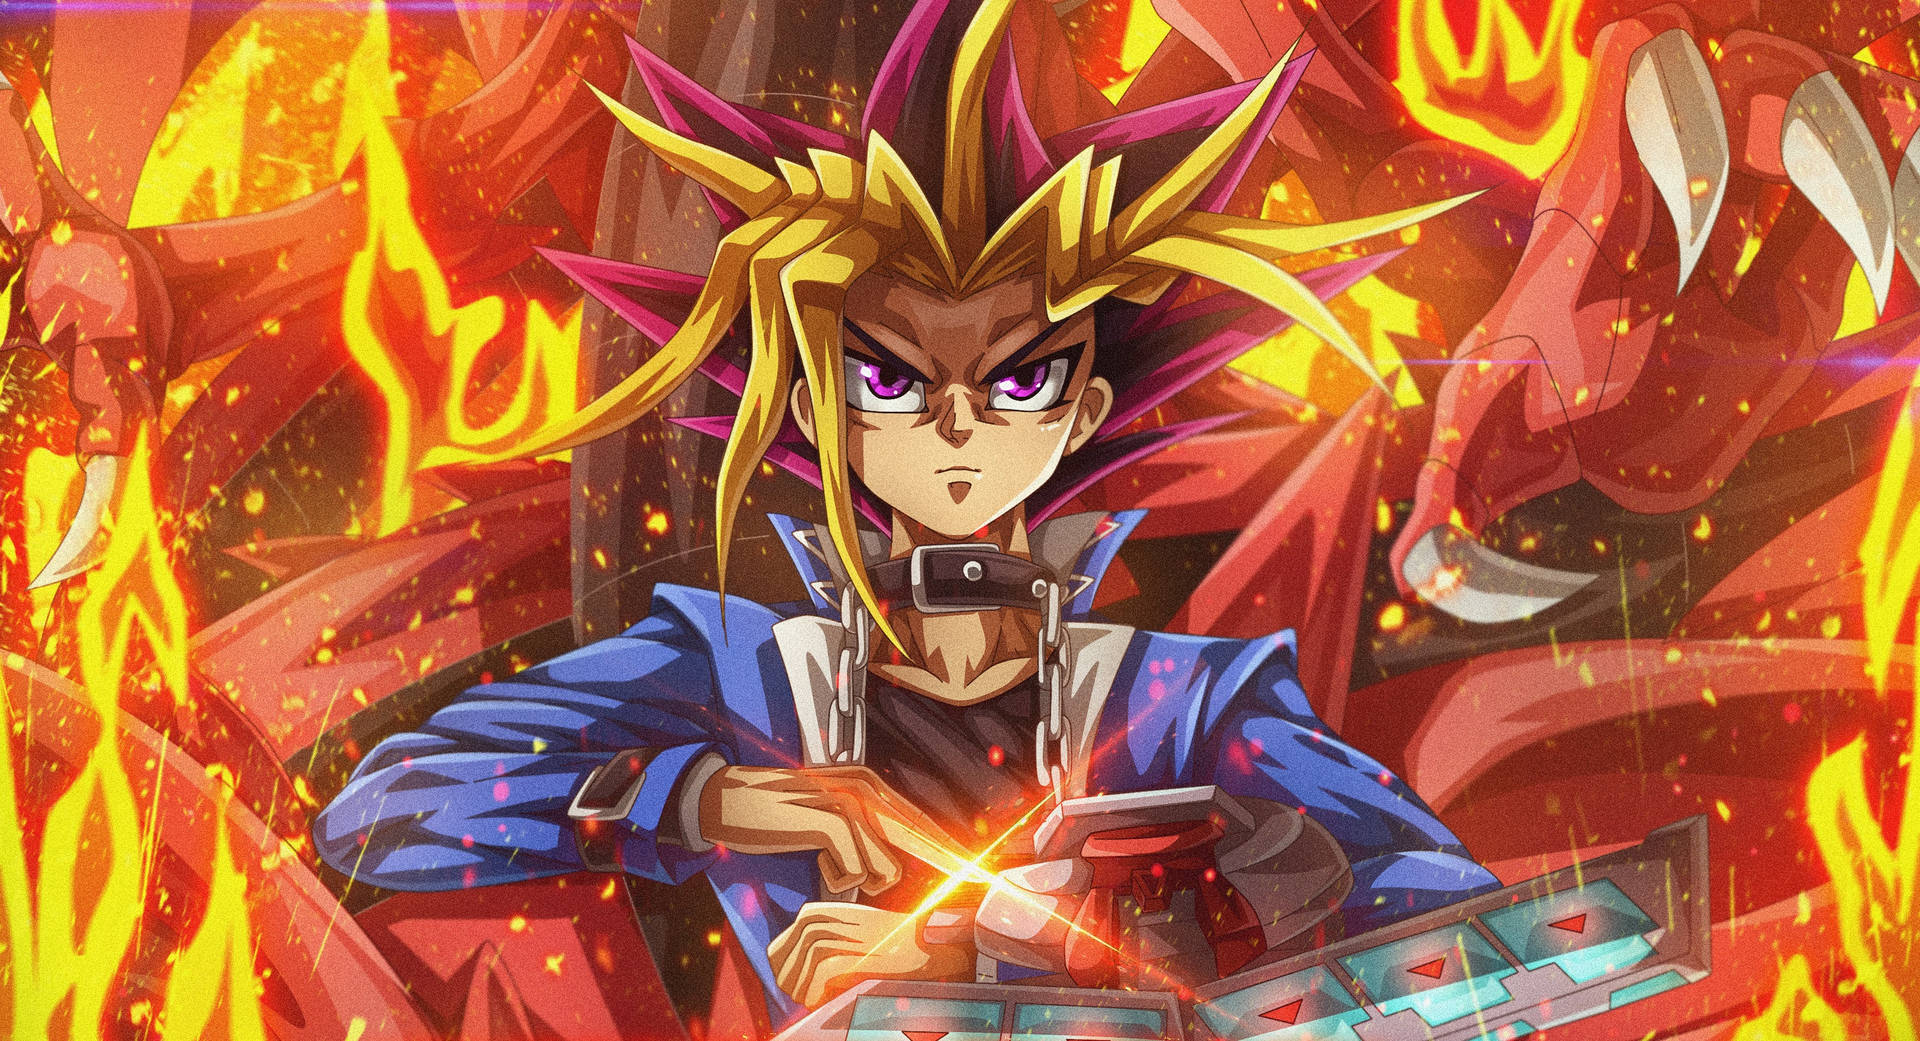 42 Yugioh Wallpapers & Backgrounds For